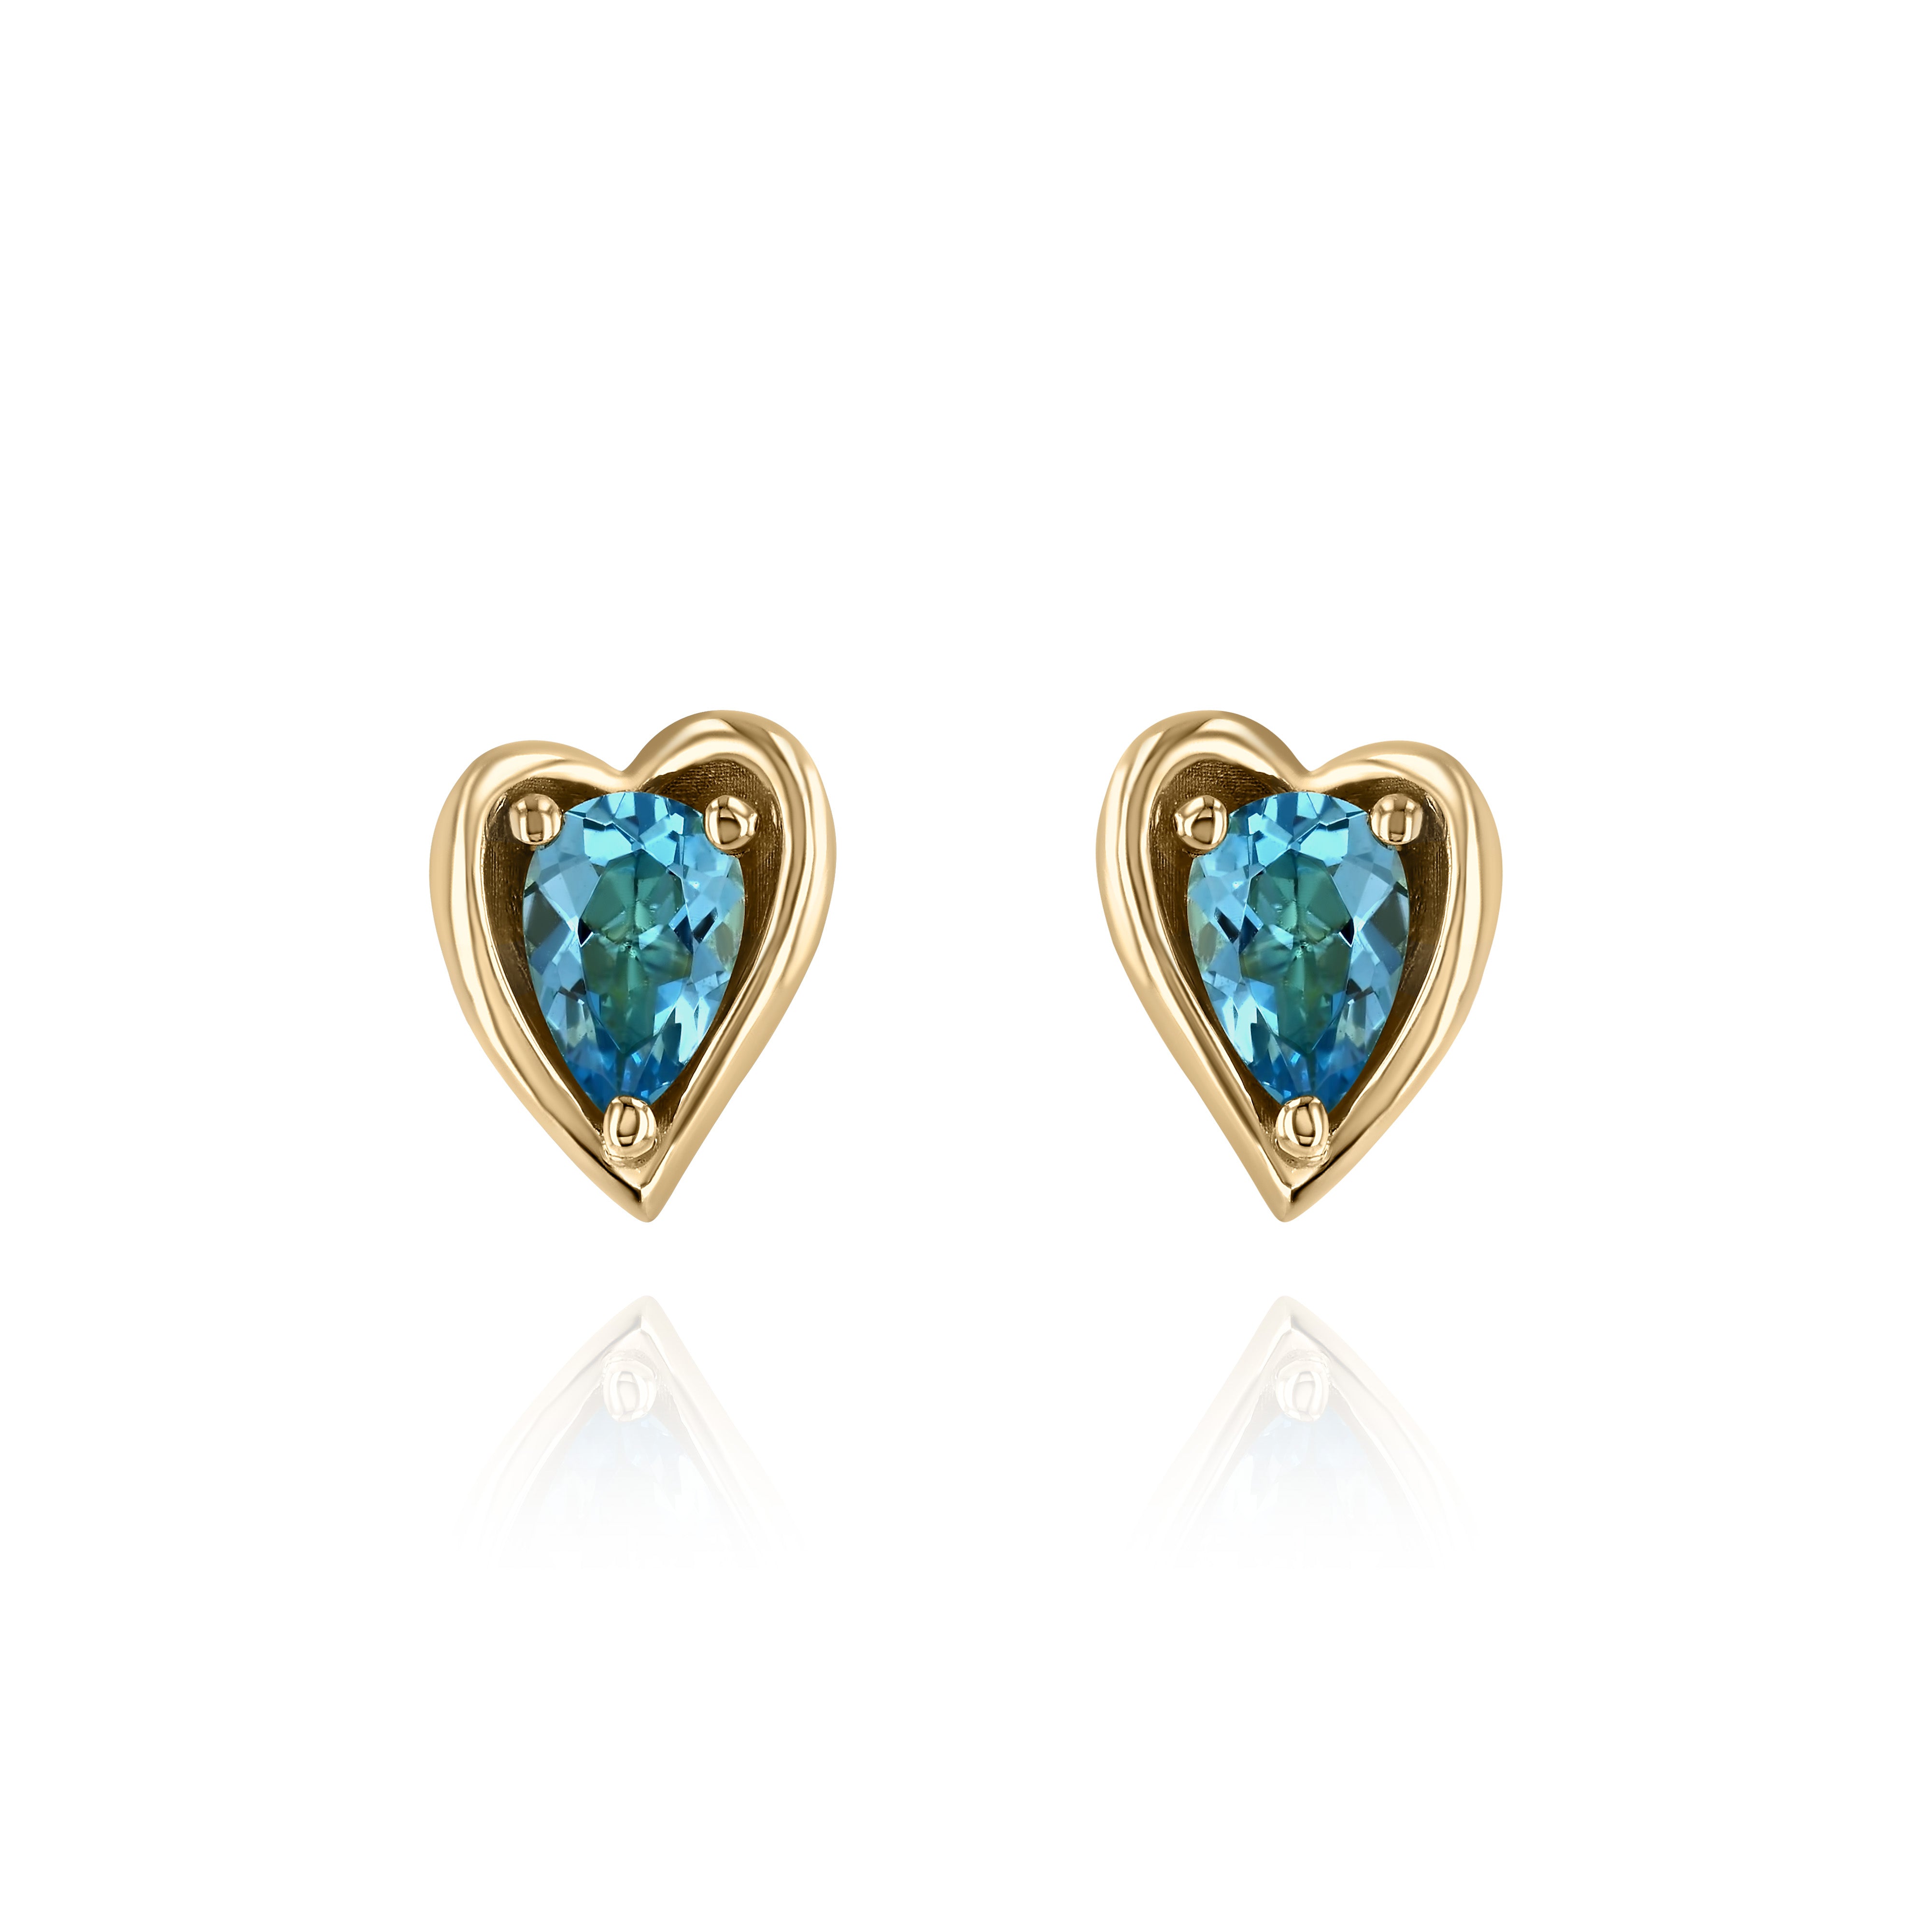 Yellow Gold heart shaped Earrings a pear shaped Topaz, Small